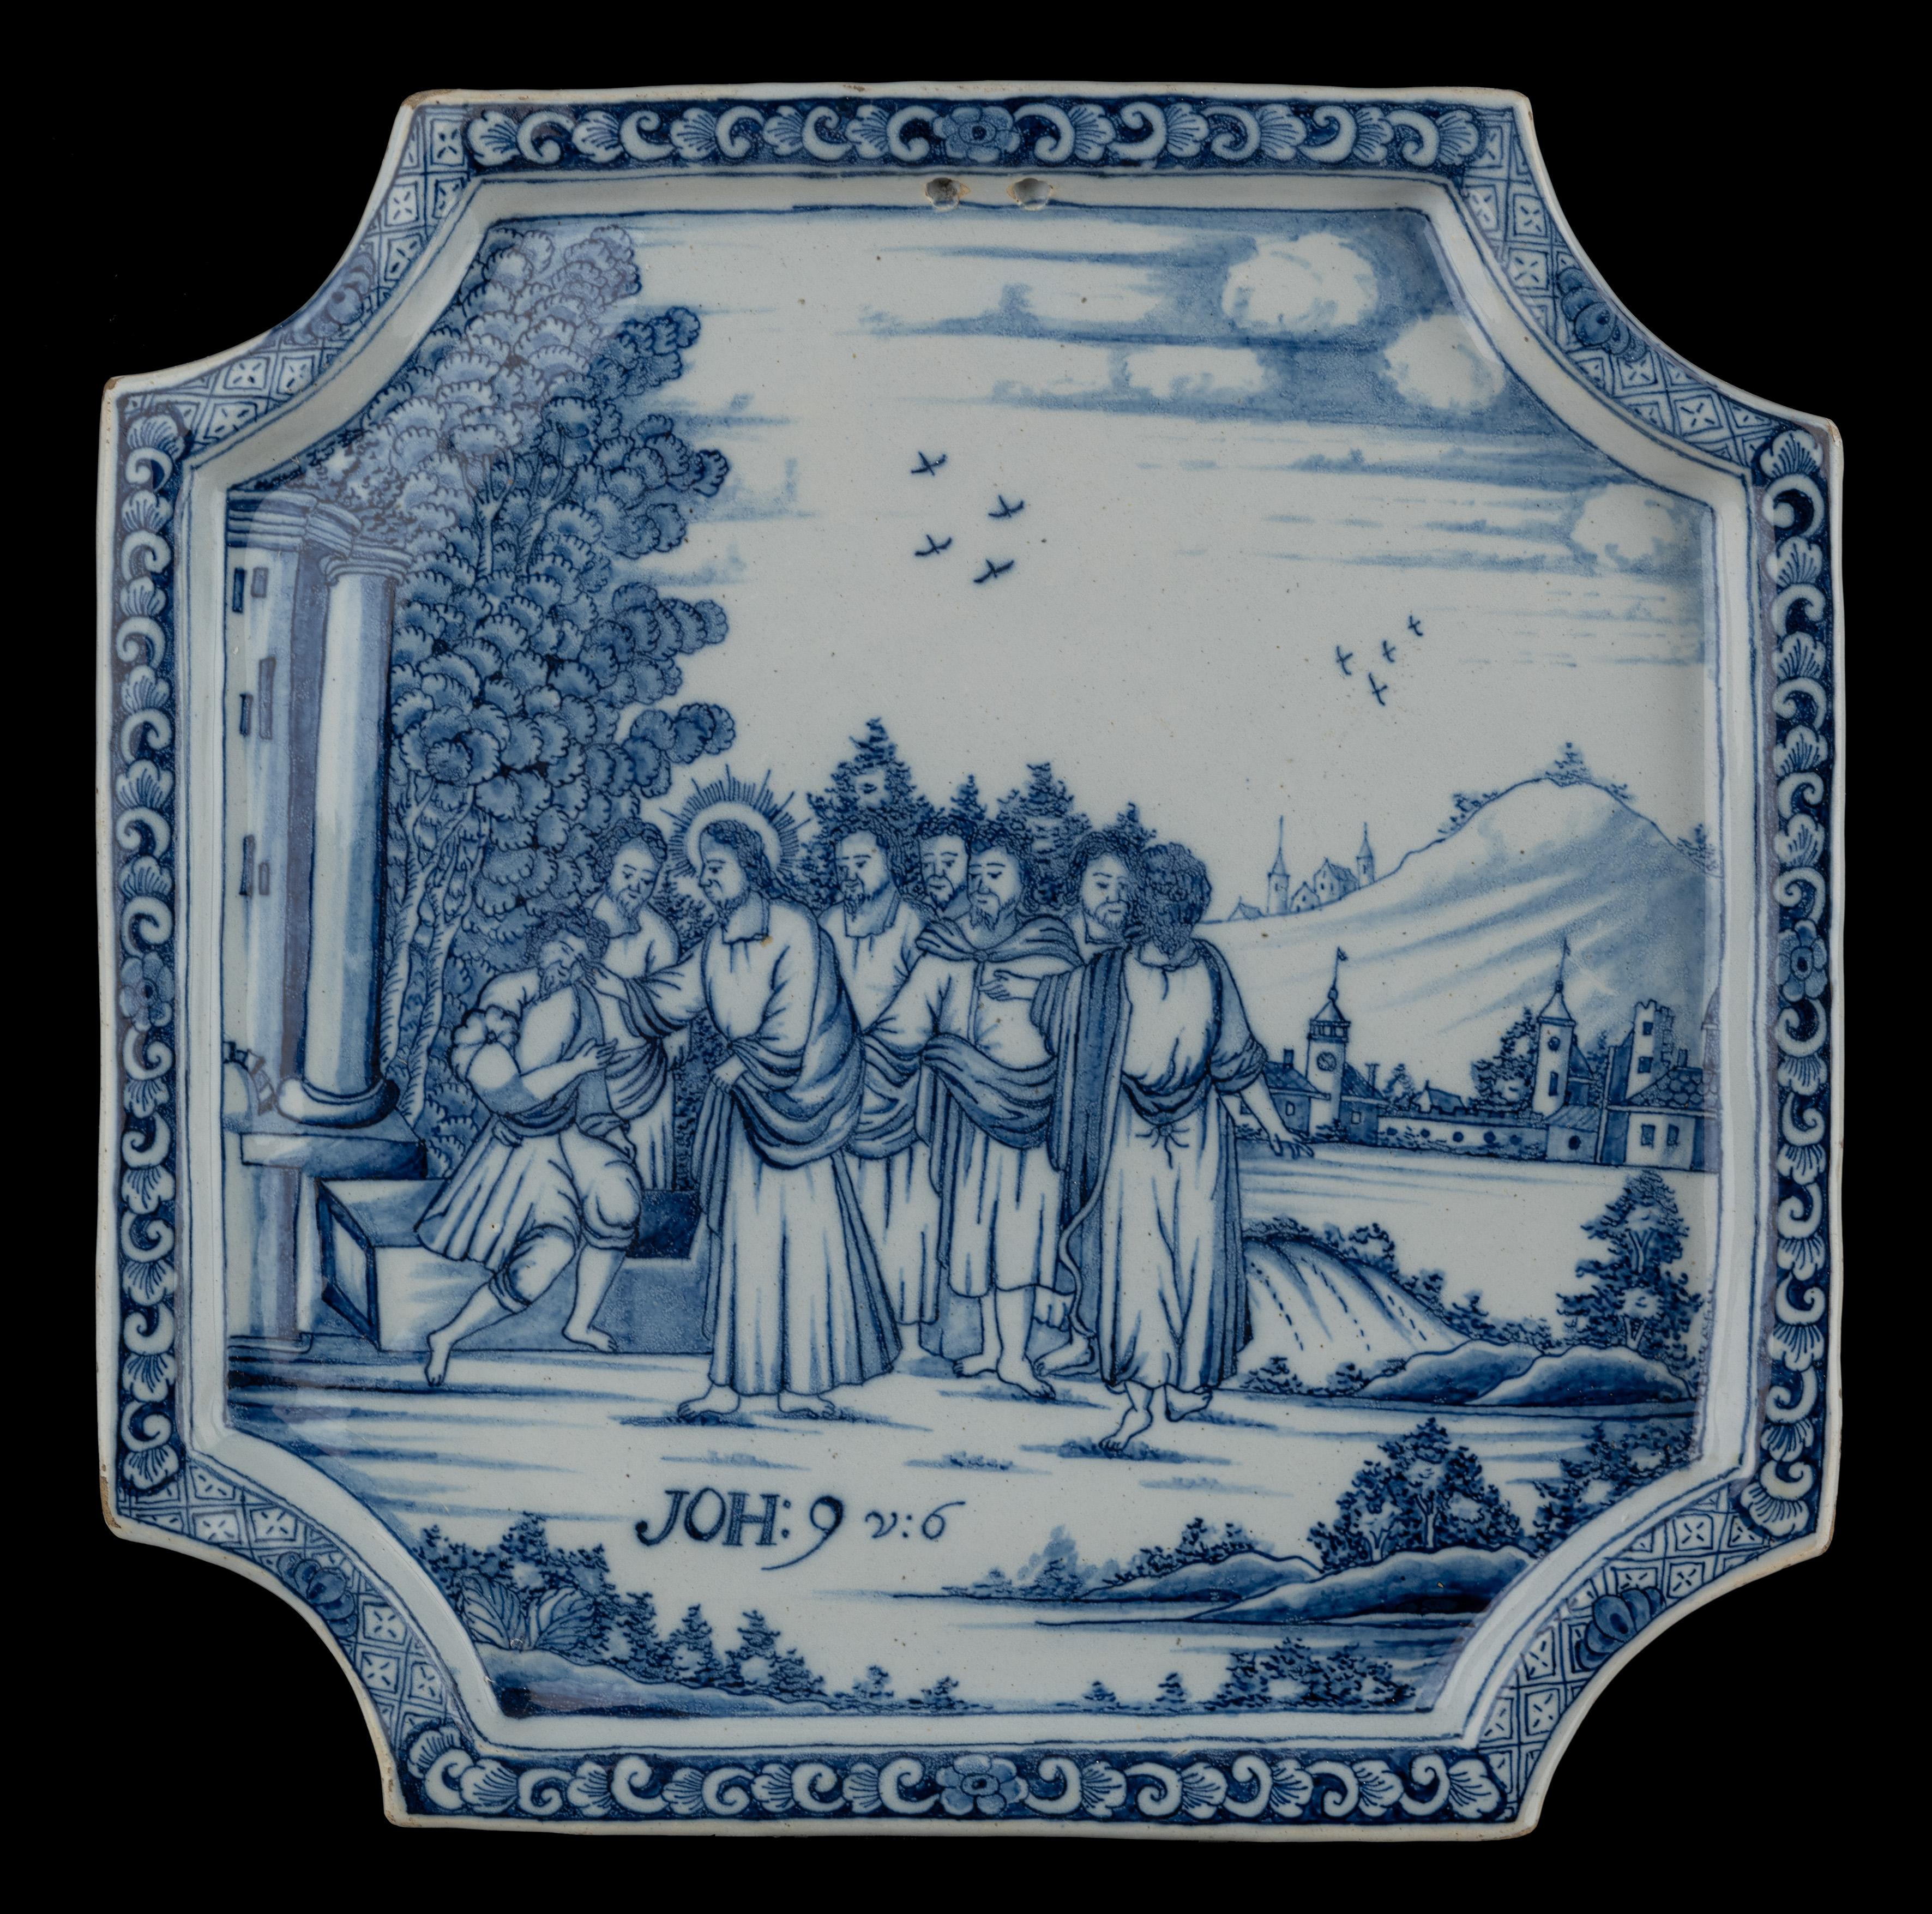 Blue and white Biblical plaque. Delft, 1740-1760 

The square plaque has indented corners, a raised, flat rim, and is painted in blue with a biblical decor  in a hilly landscape.  The Bible inscription John 9 v:6 is inscribed in the foreground.